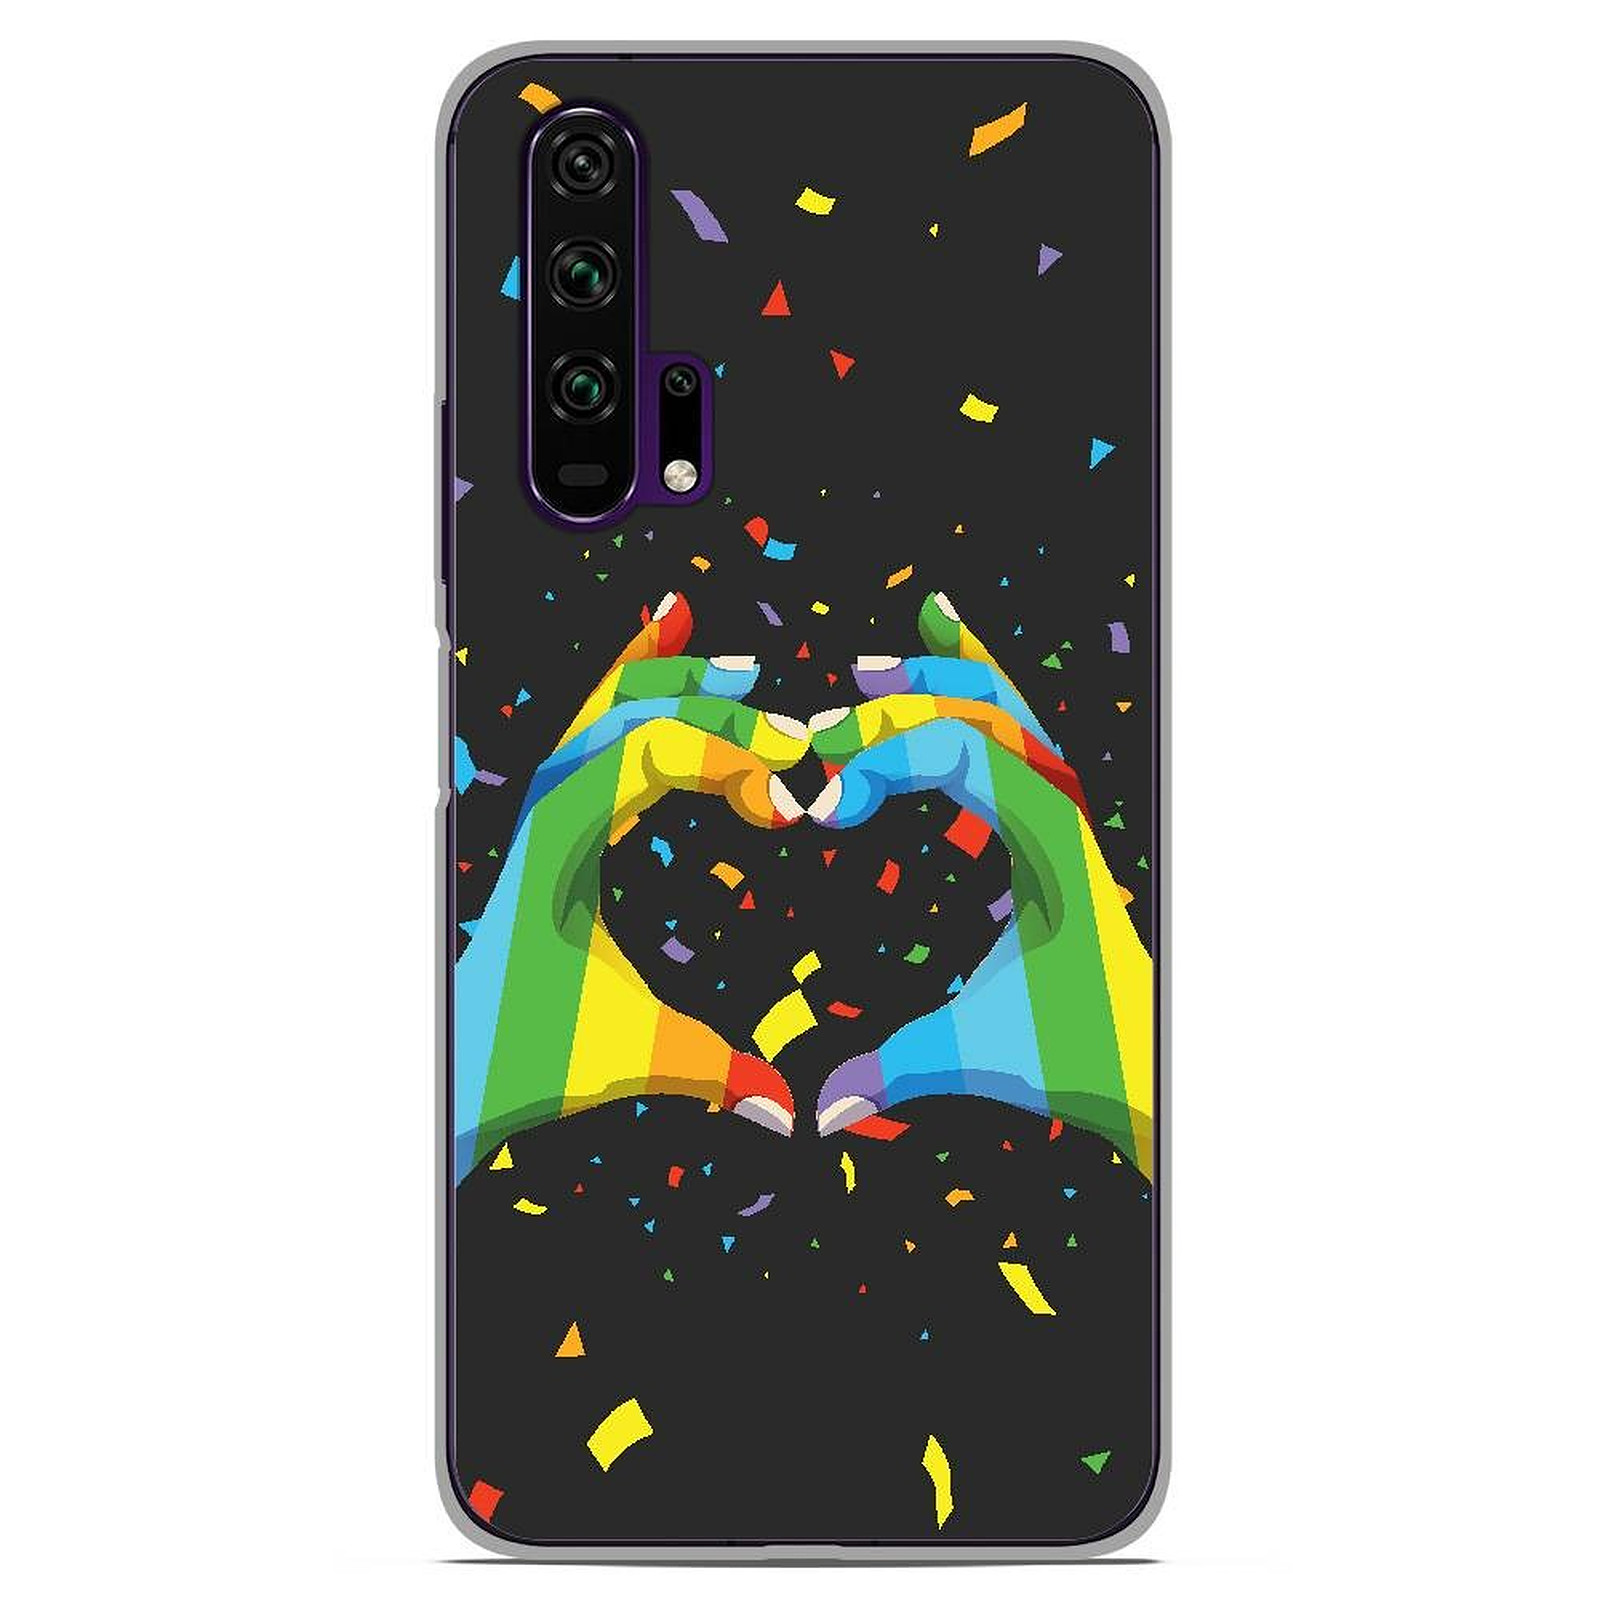 1001 Coques Coque silicone gel Huawei Honor 20 Pro motif LGBT - Coque telephone 1001Coques